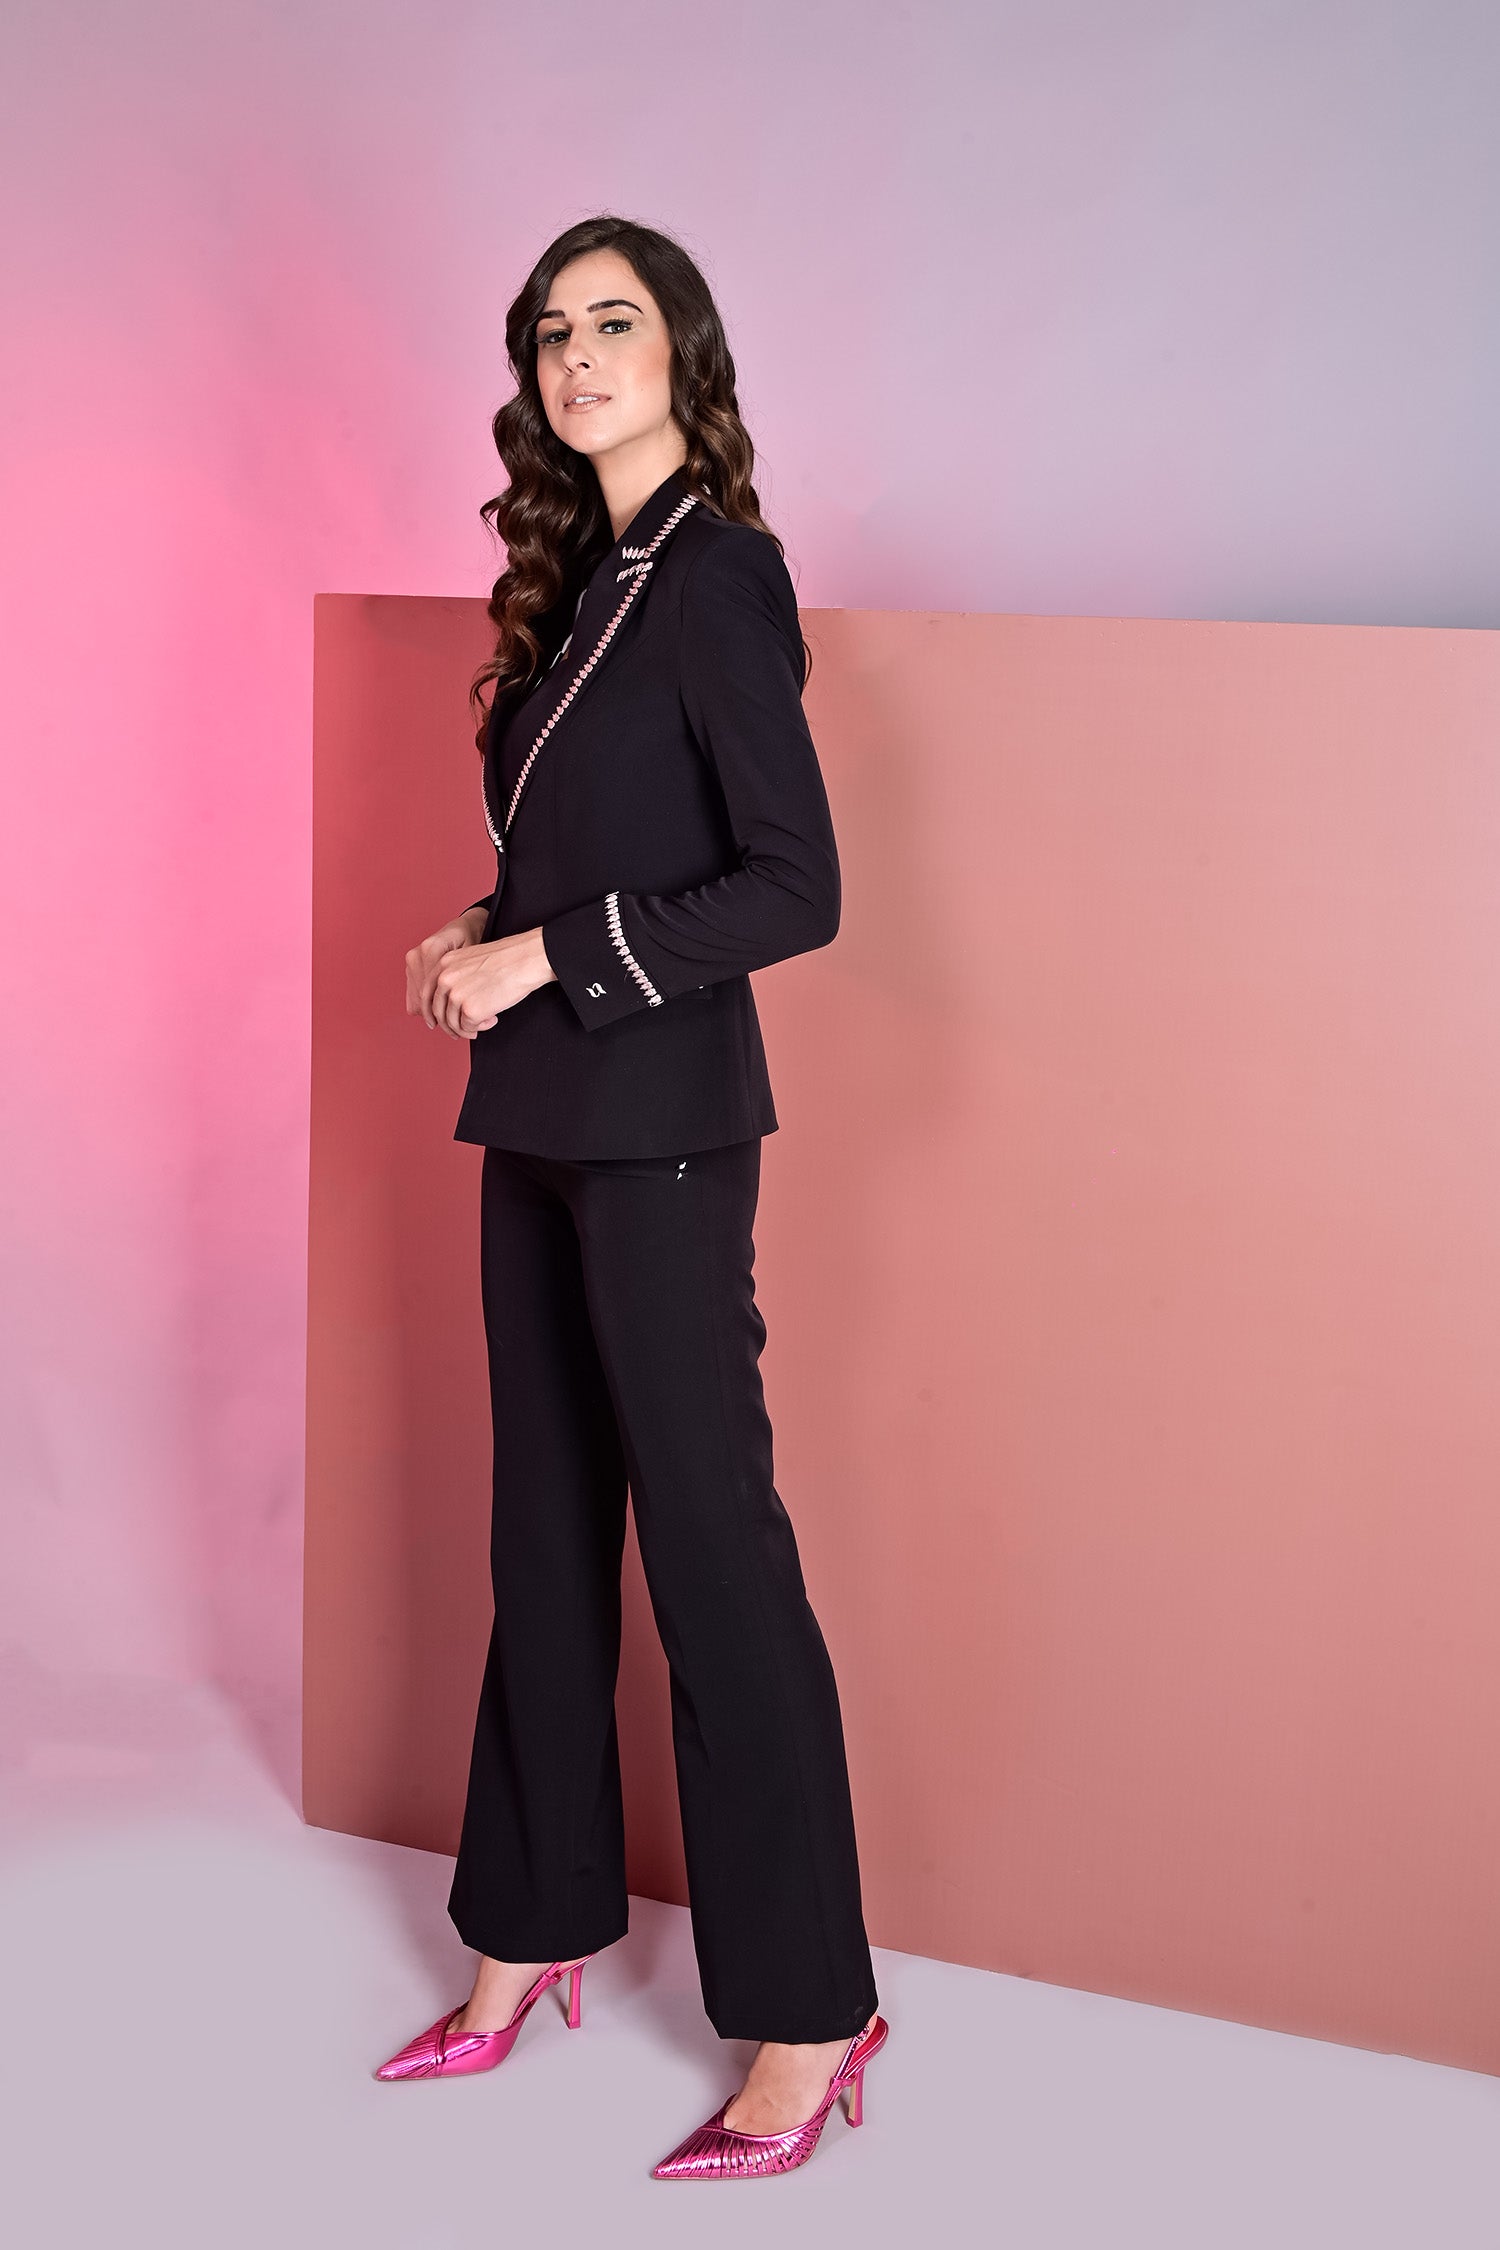 Petal Embroidered Black Blazer With Crop Top and Flared Pants